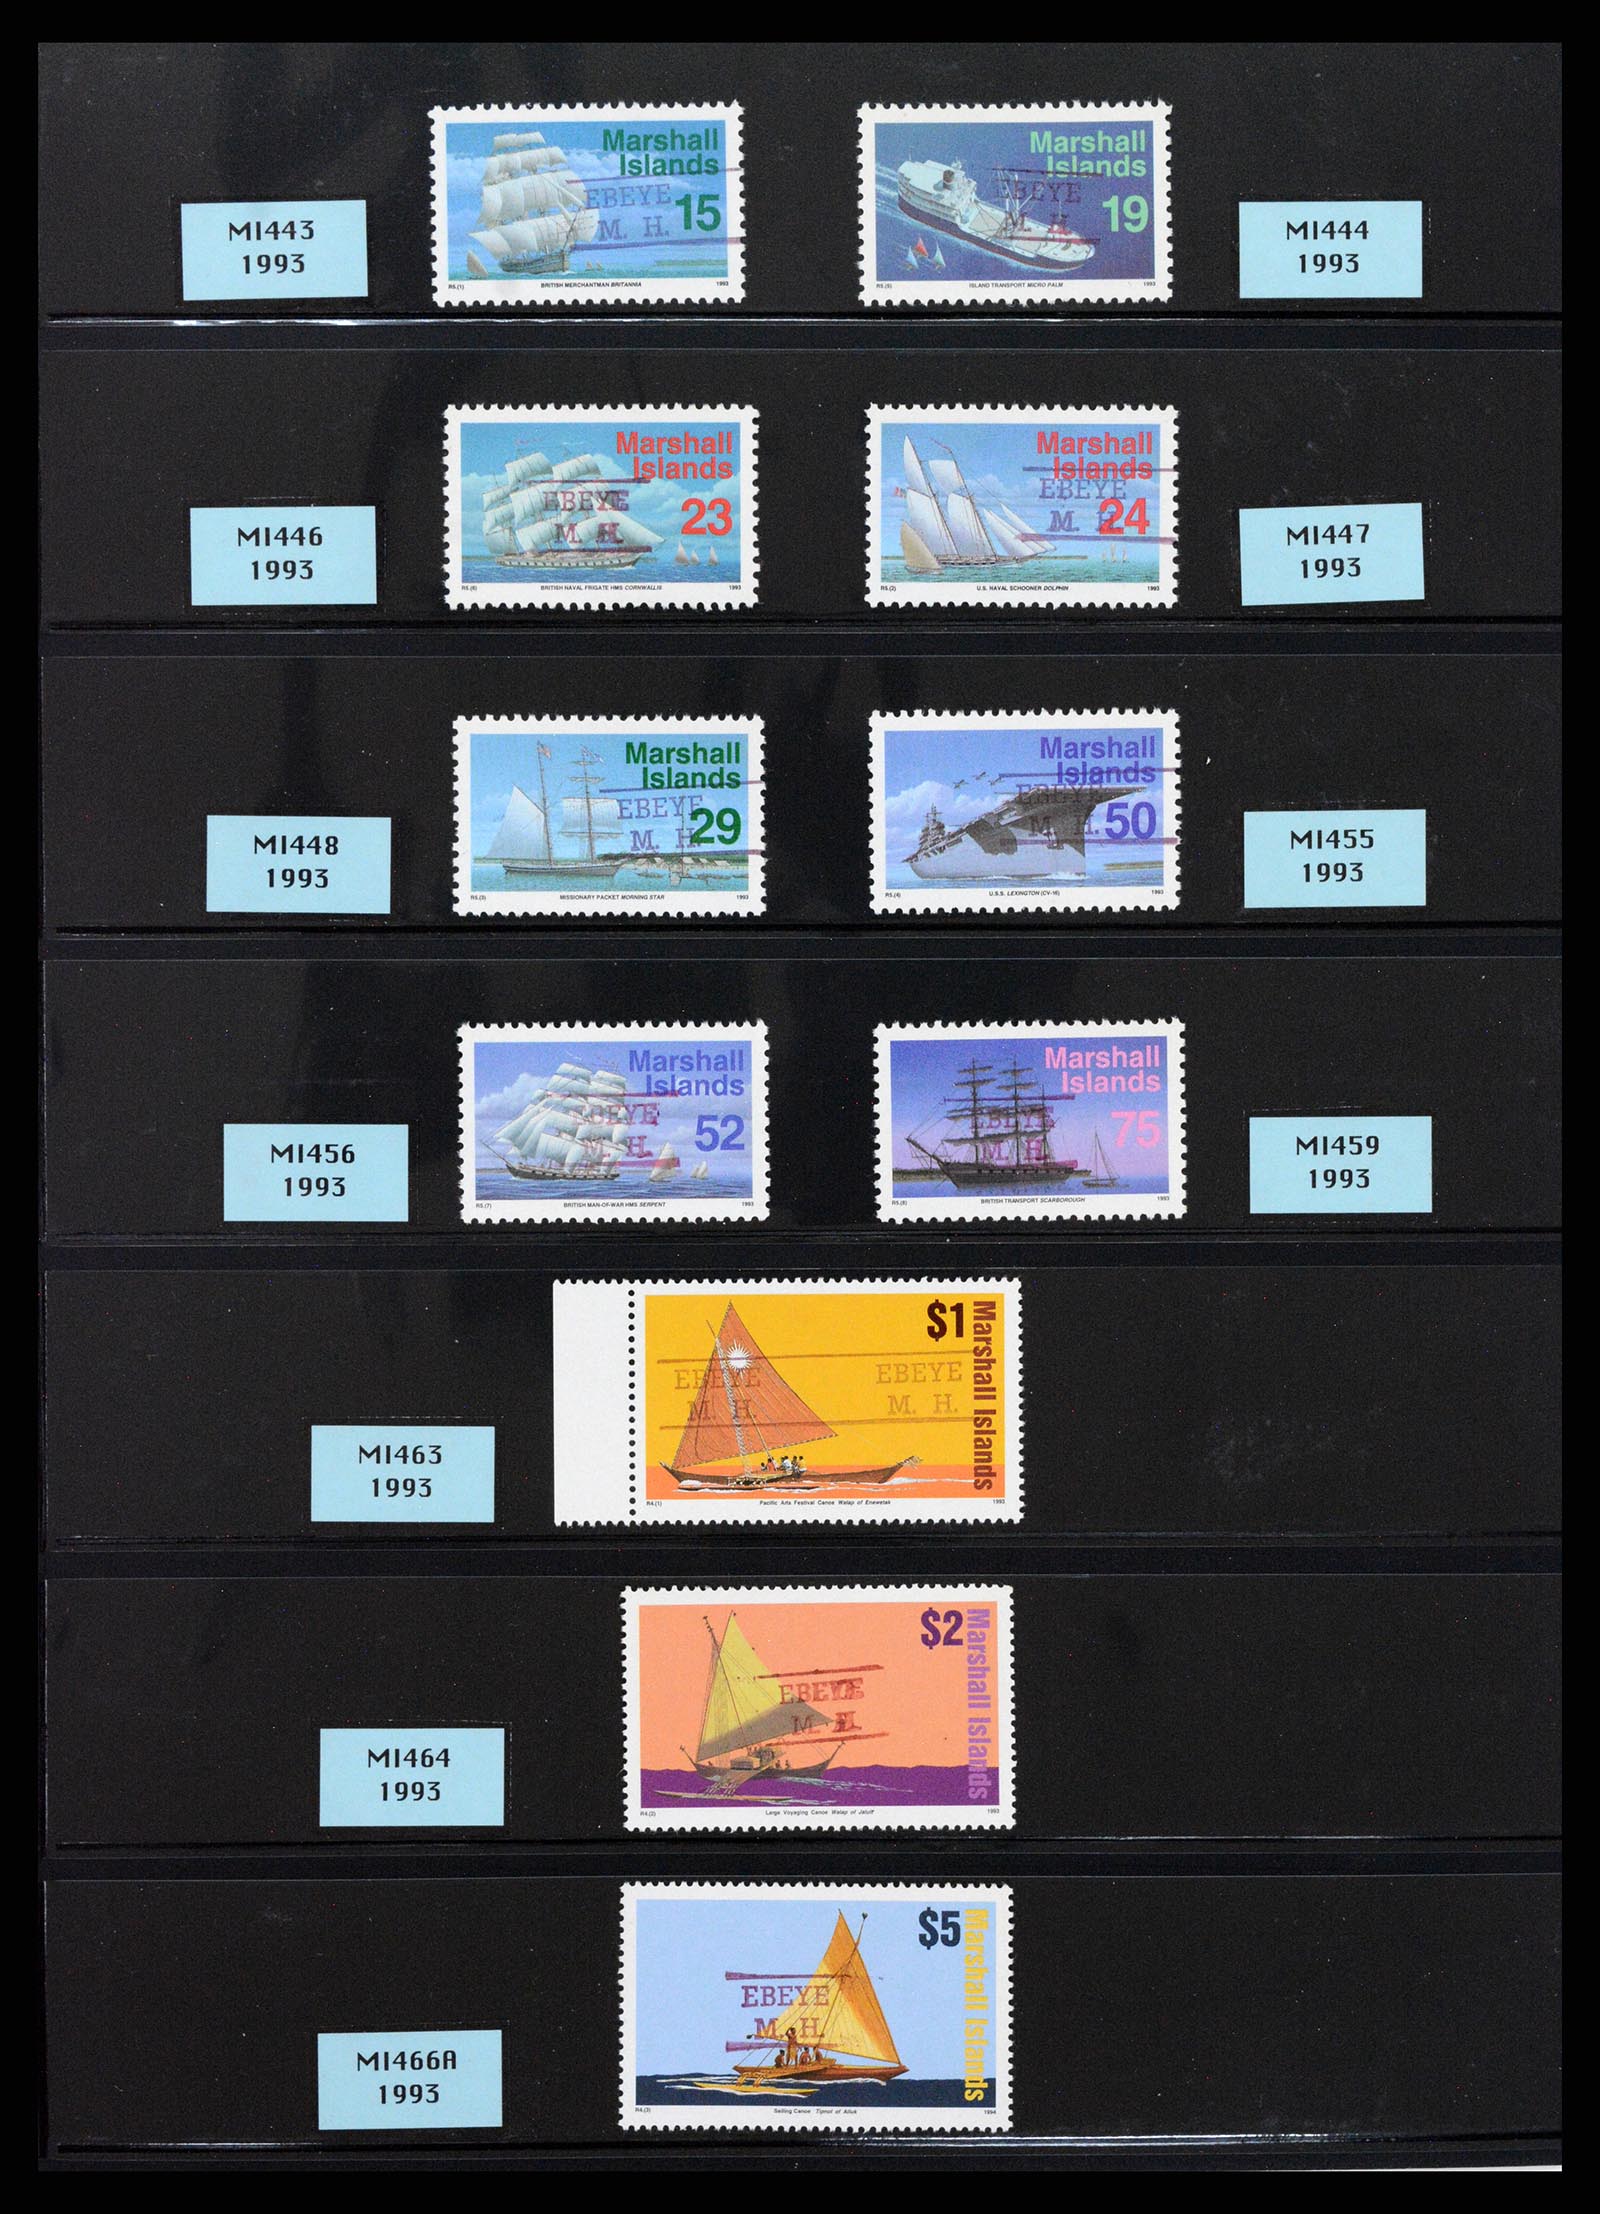 37736 004 - Stamp collection 37736 USA territories pre-cancels 1959-1995.